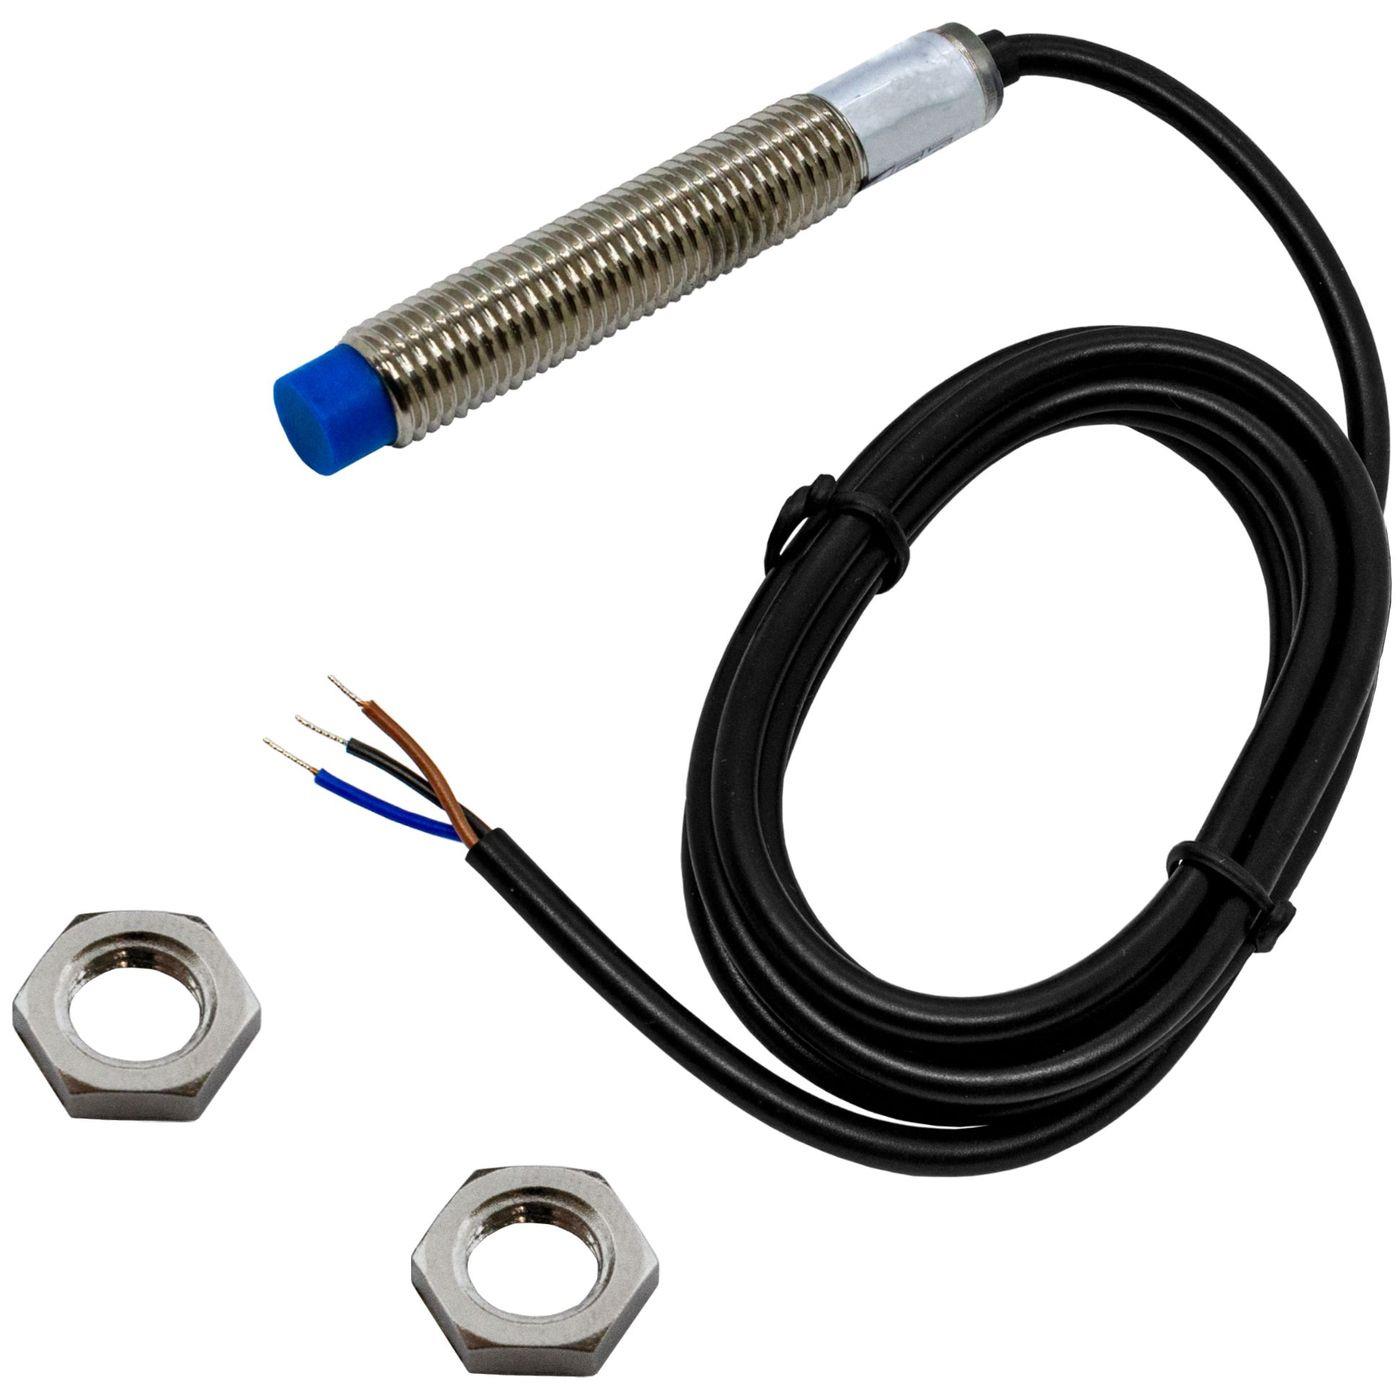 Proximity switch Inductive 8mm M8 NPN NO contact 6...36V DC IP67 Sensor Brass nickel-plated -30...+65°C